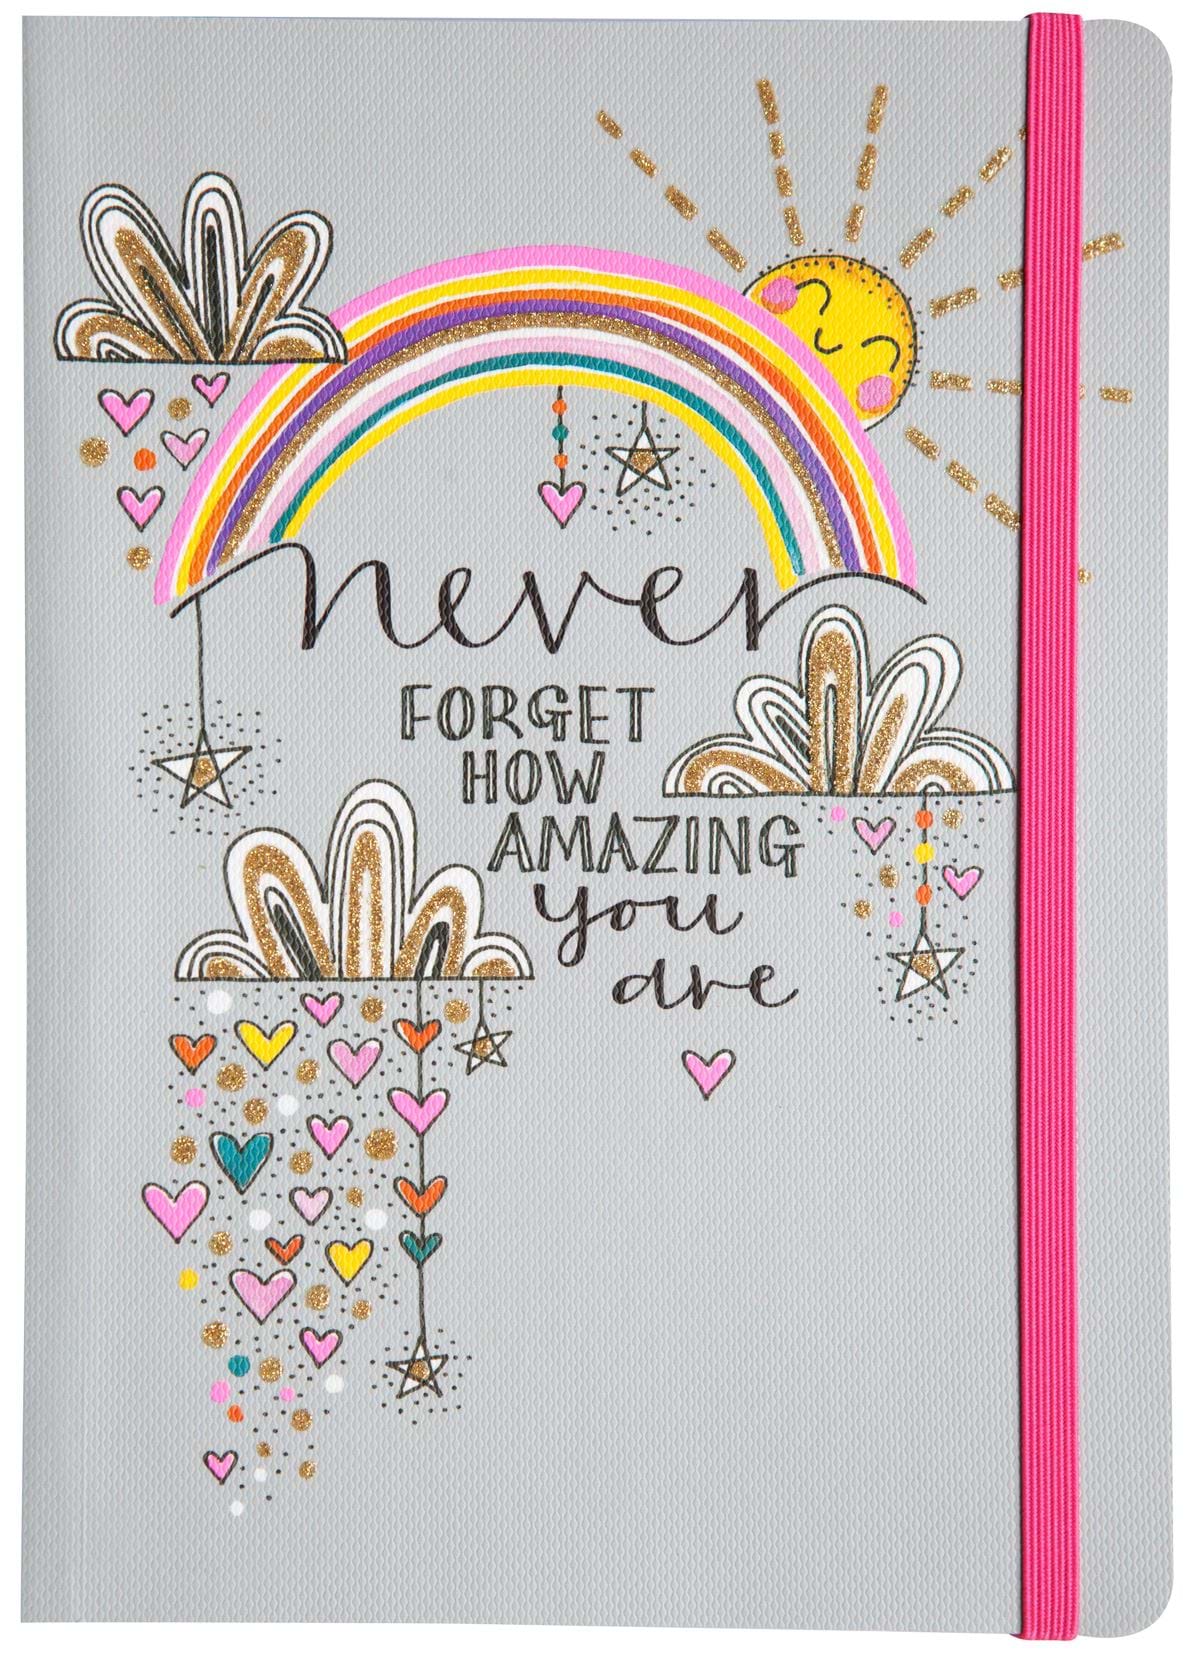 How Amazing You Are Notebook